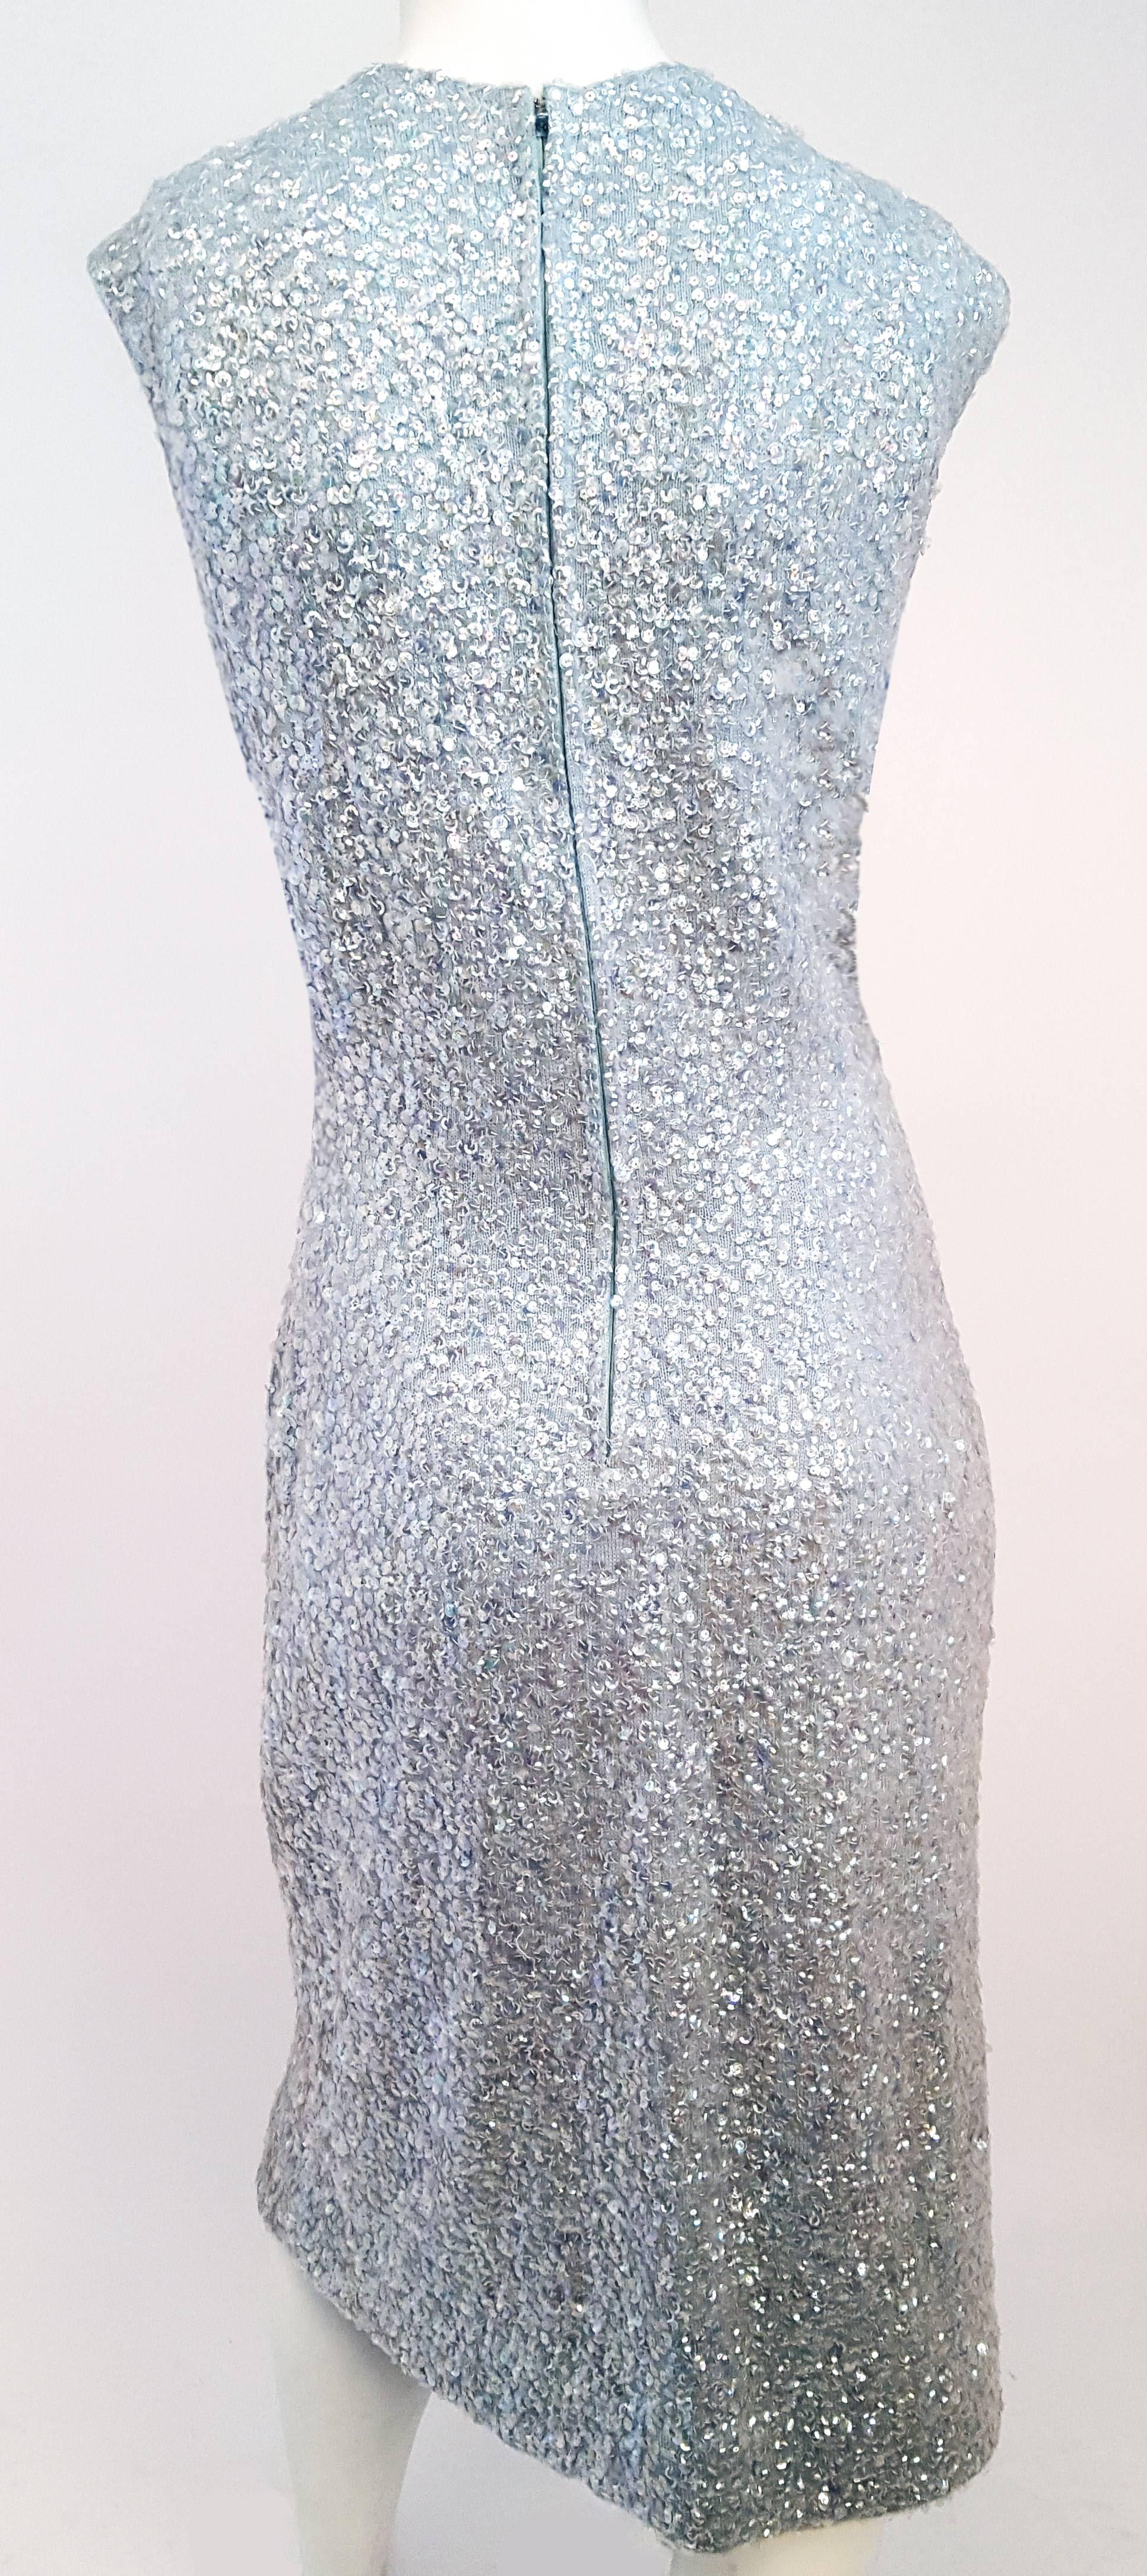 1960s Sequin and Beaded Knit Dress. Hand embellished on knit dress. Fully lined, metal back zipper. 